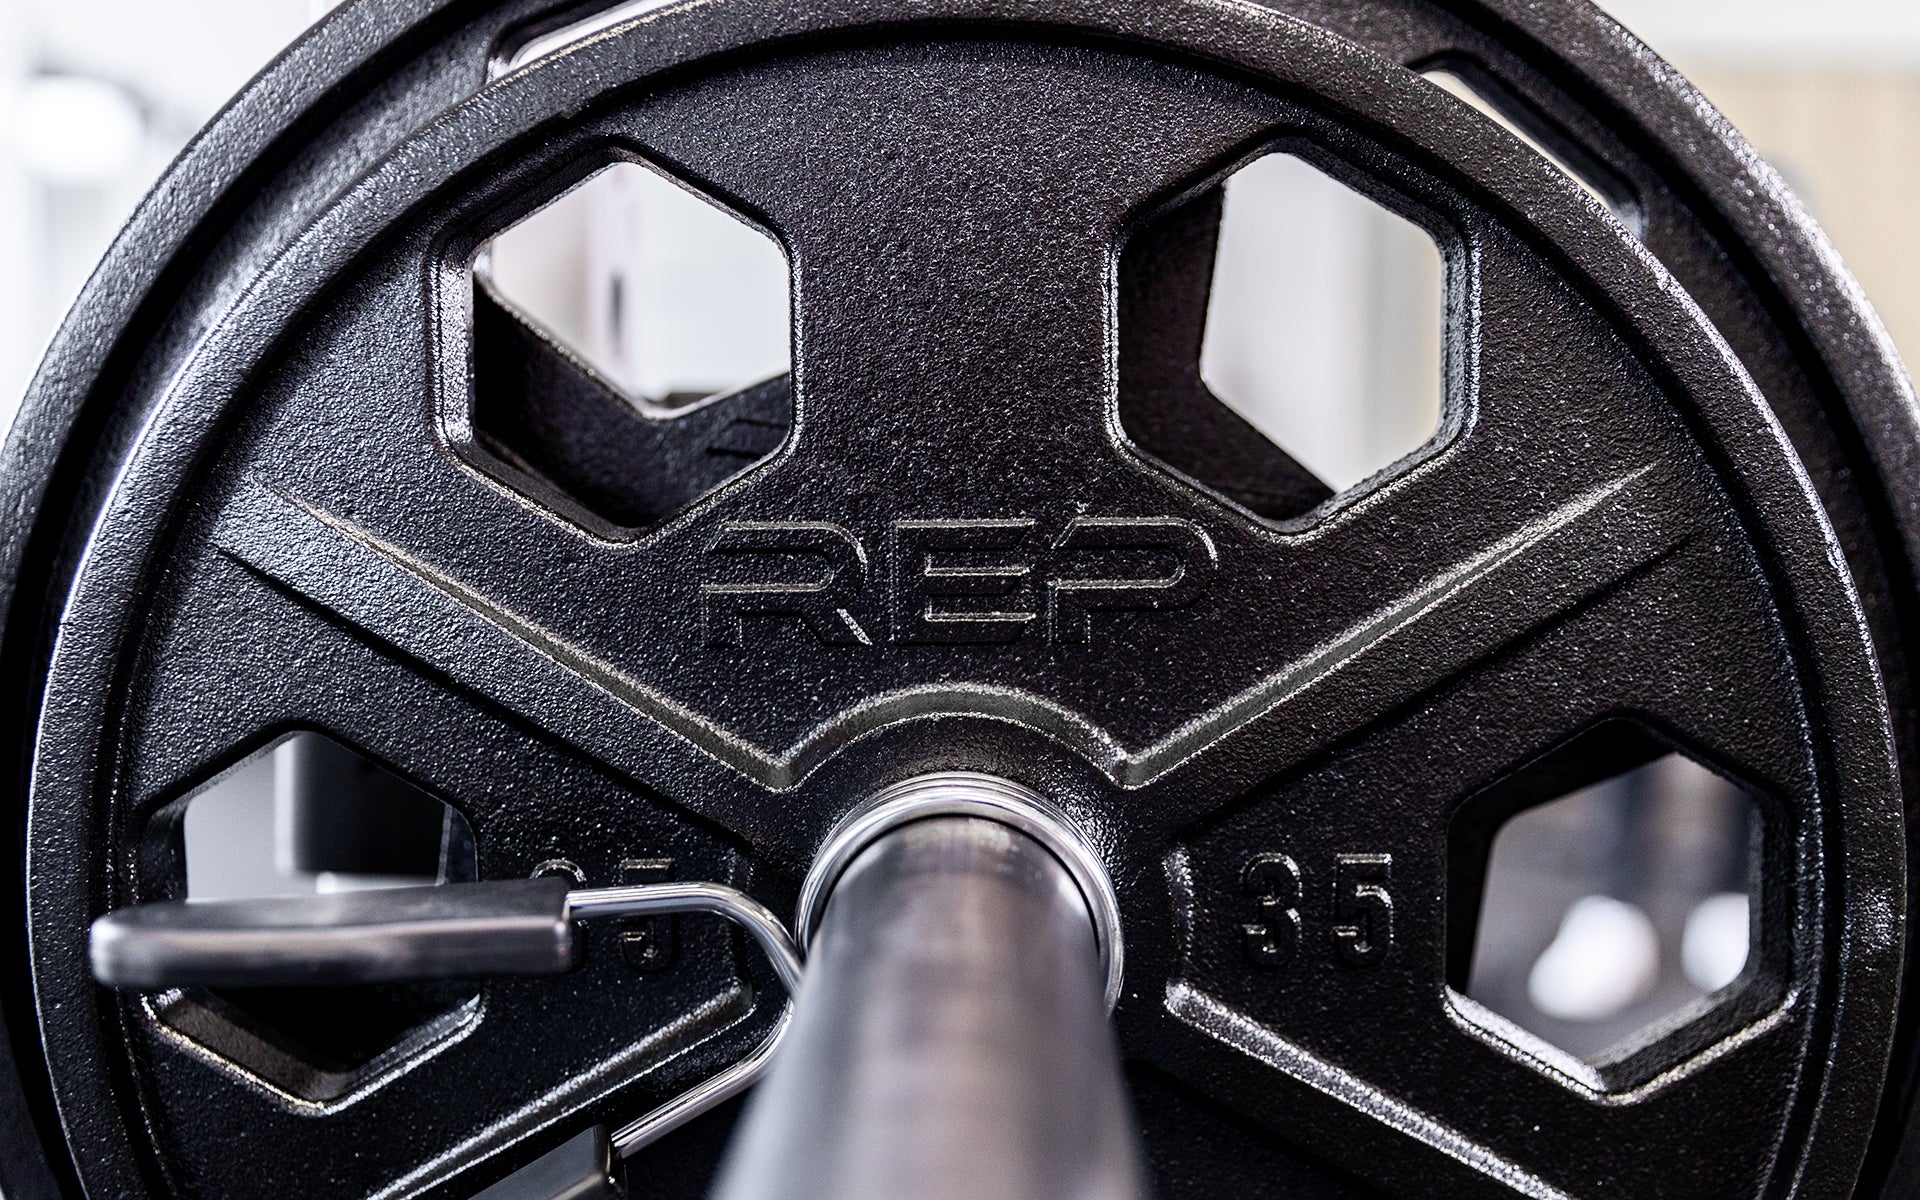 Close-up view of a 35lb USA-Made Equalizer Iron Plate loaded on a barbell.